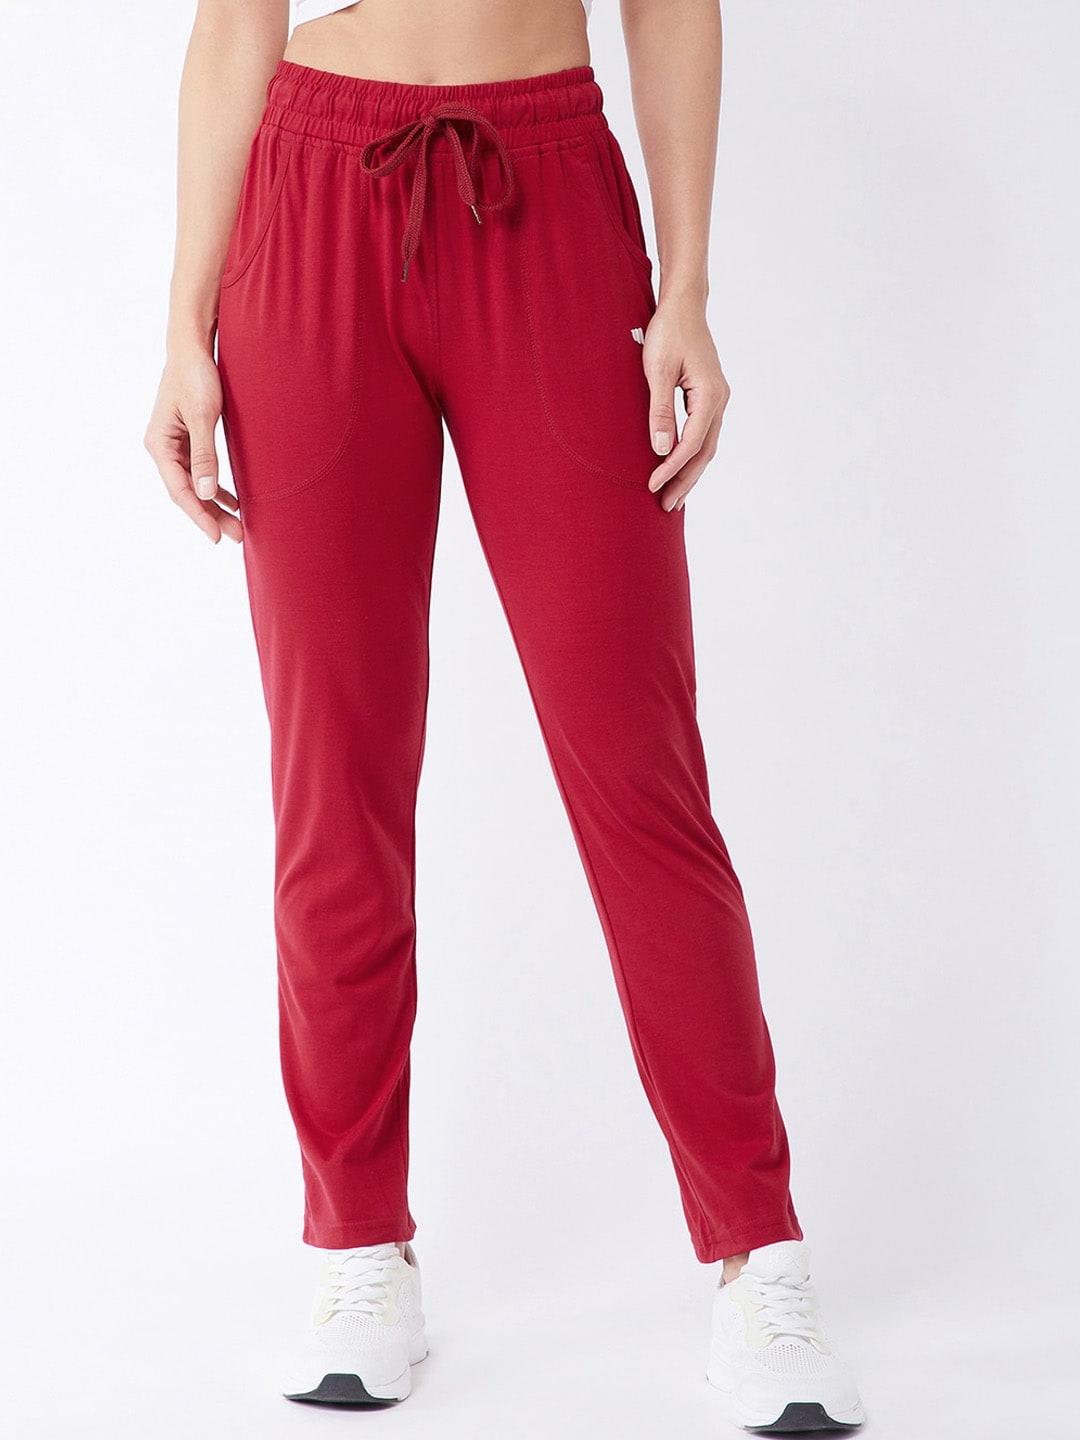 modeve-women-red-solid-regular-fit-track-pants